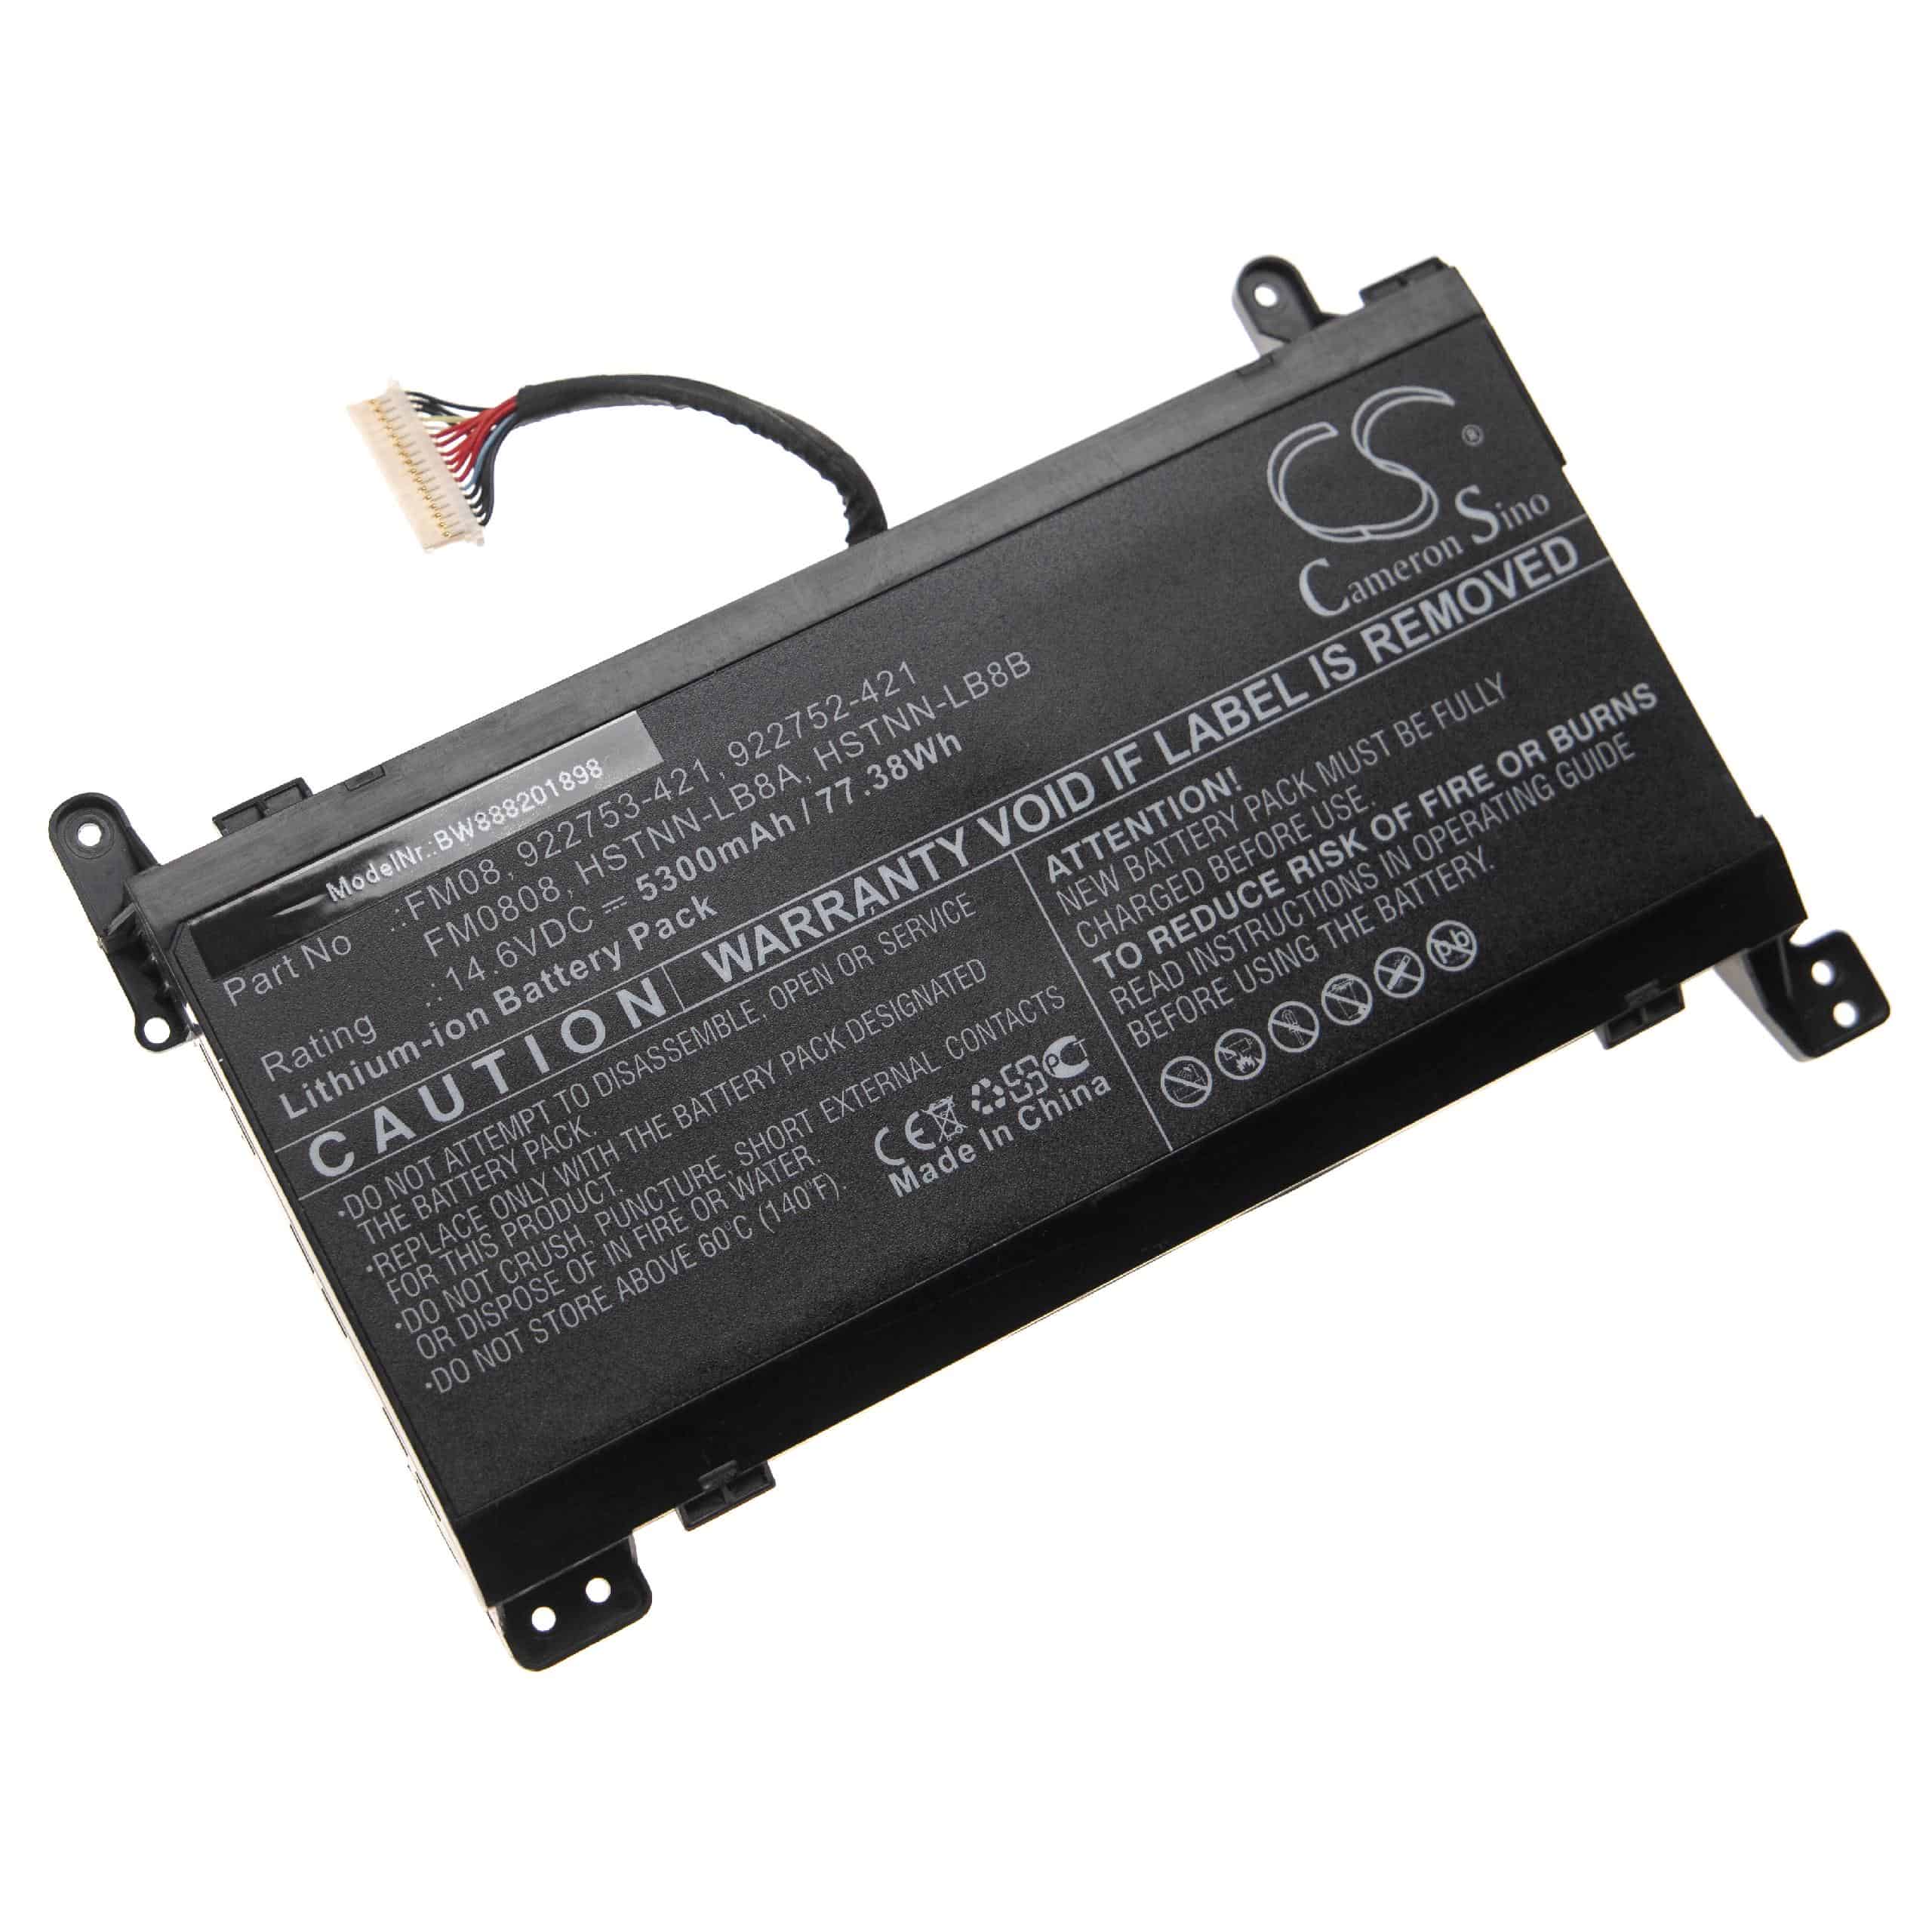 Notebook Battery Replacement for HP 922753-421, 922976-855, FM08, 922752-421 - 5300mAh 14.6V Li-Ion, black